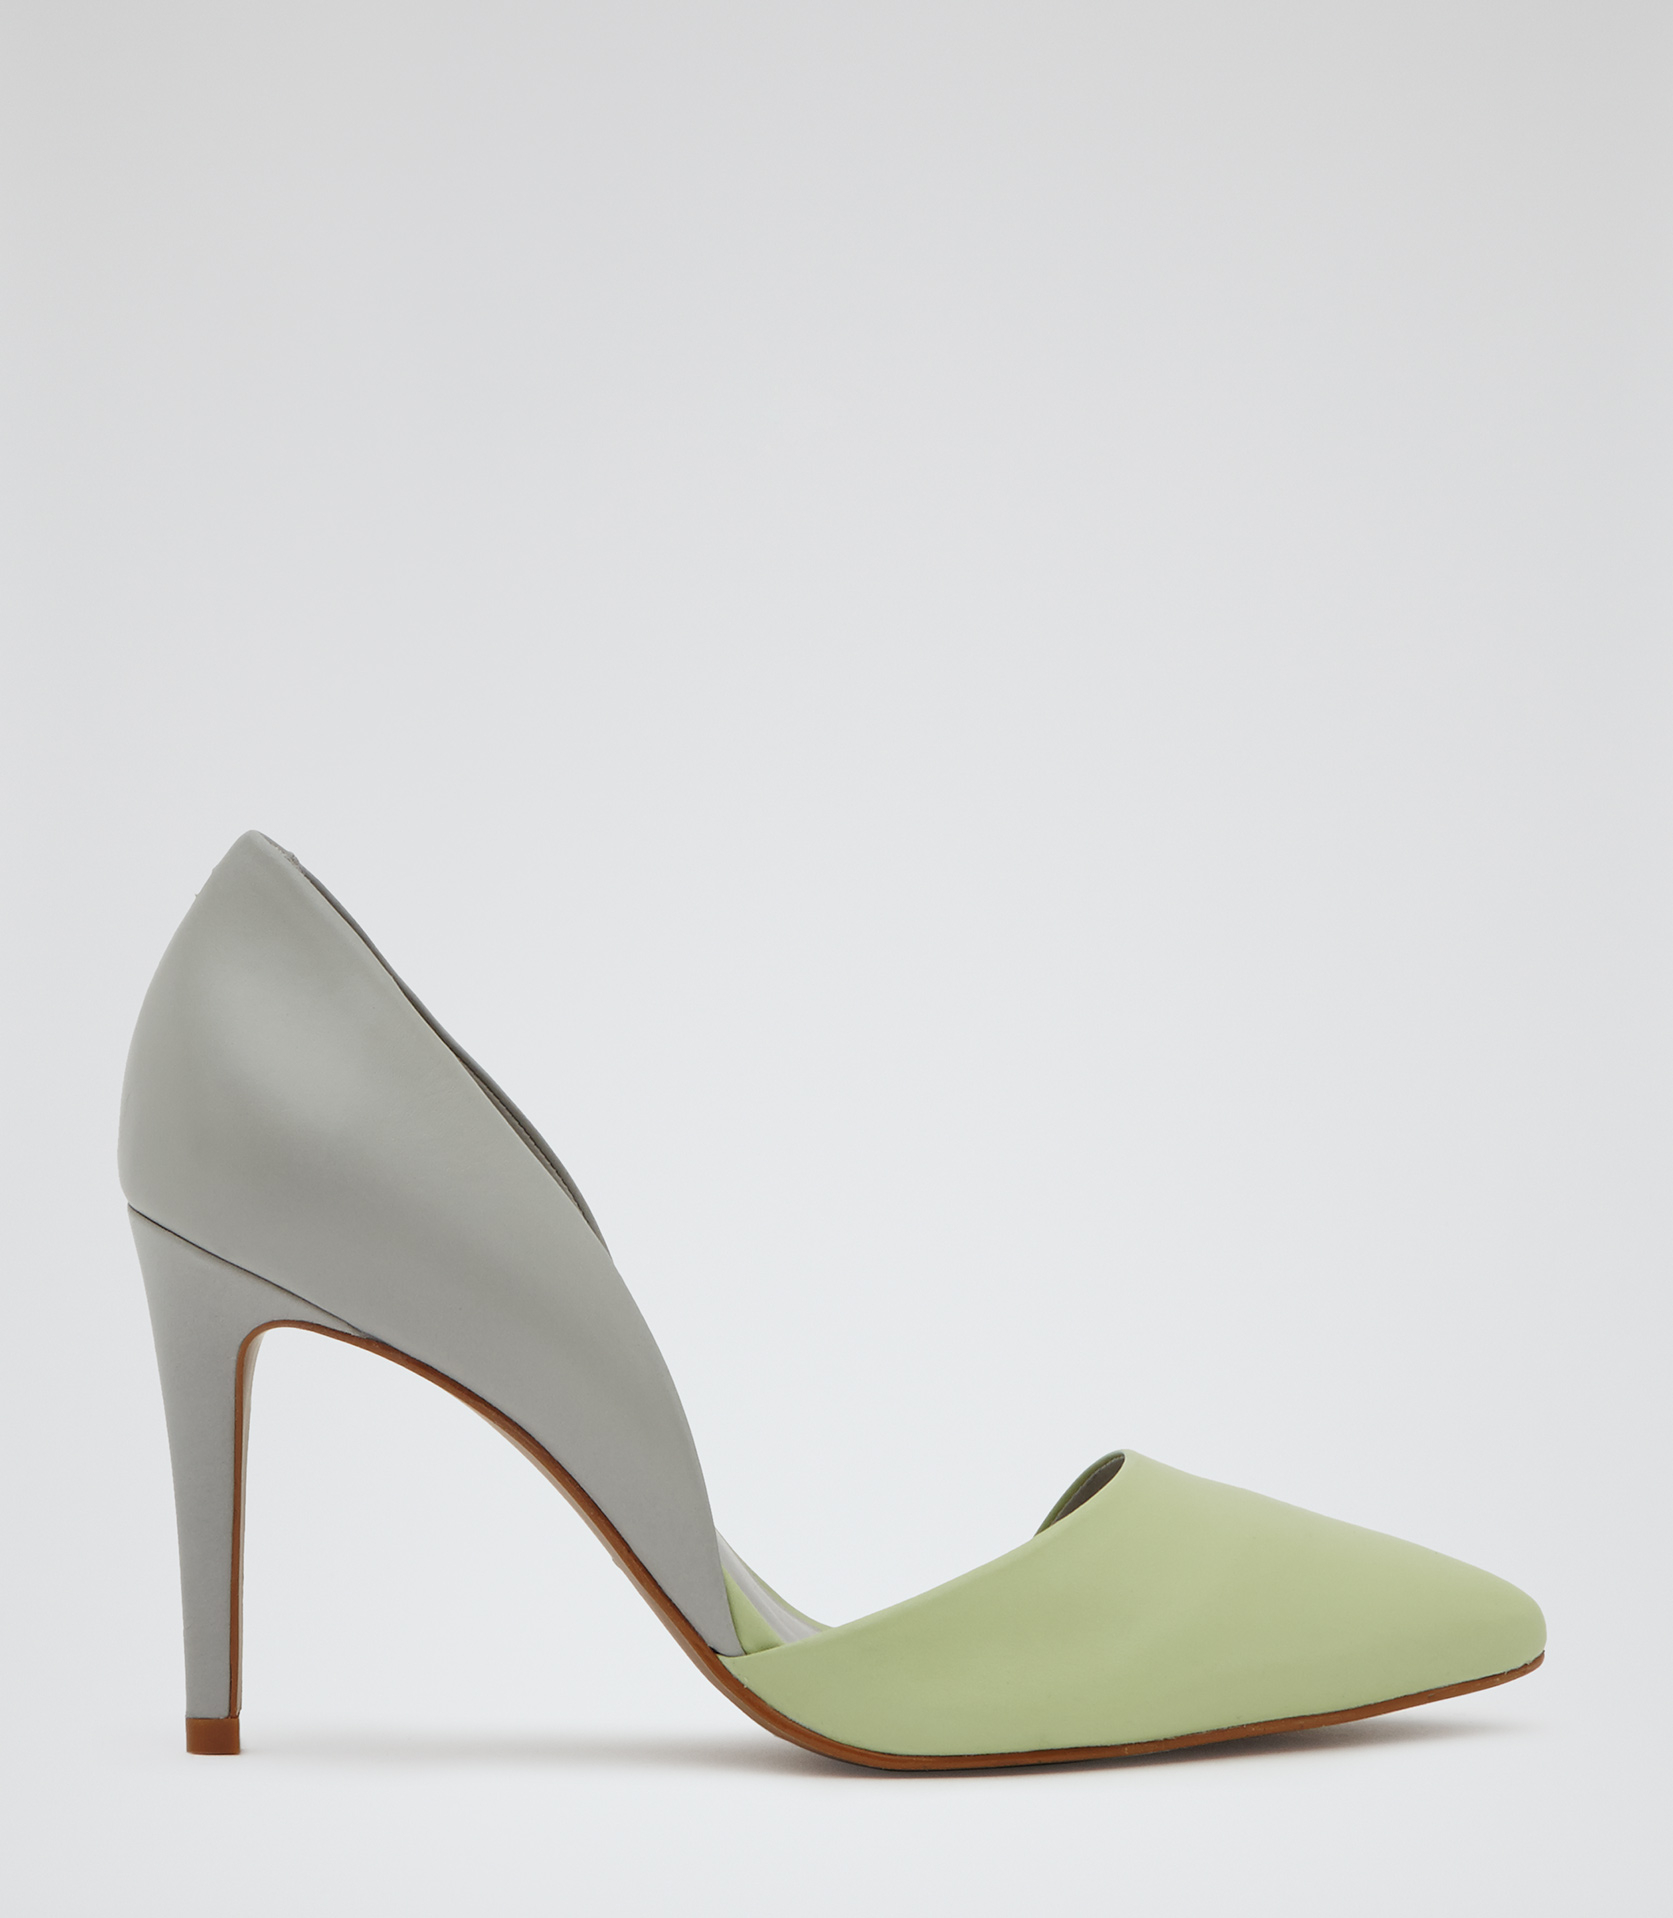 Reiss Brina Asymmetric Court Shoes in Lime Sorbet (Gray) - Lyst